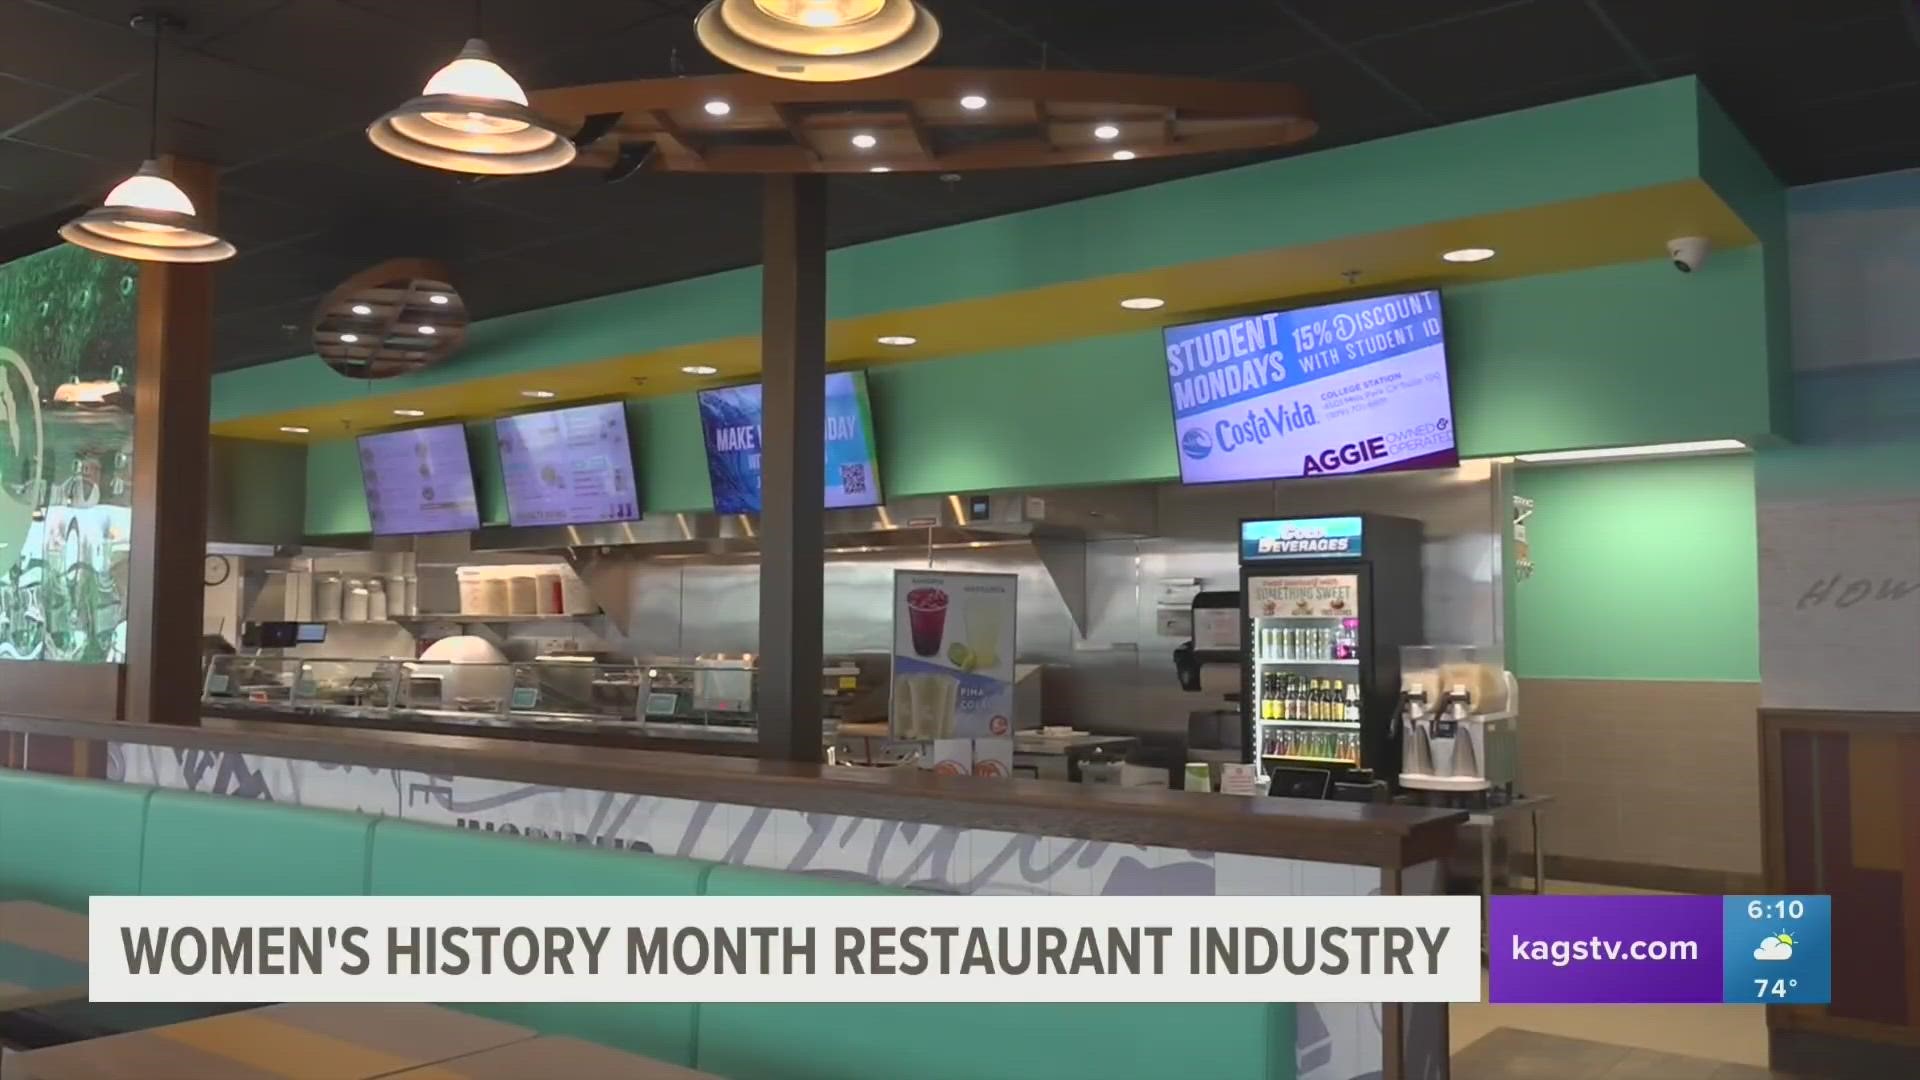 Costa Vida owner Holly Johnston spoke with KAGS about owning a restaurant in a traditionally male-dominated industry.